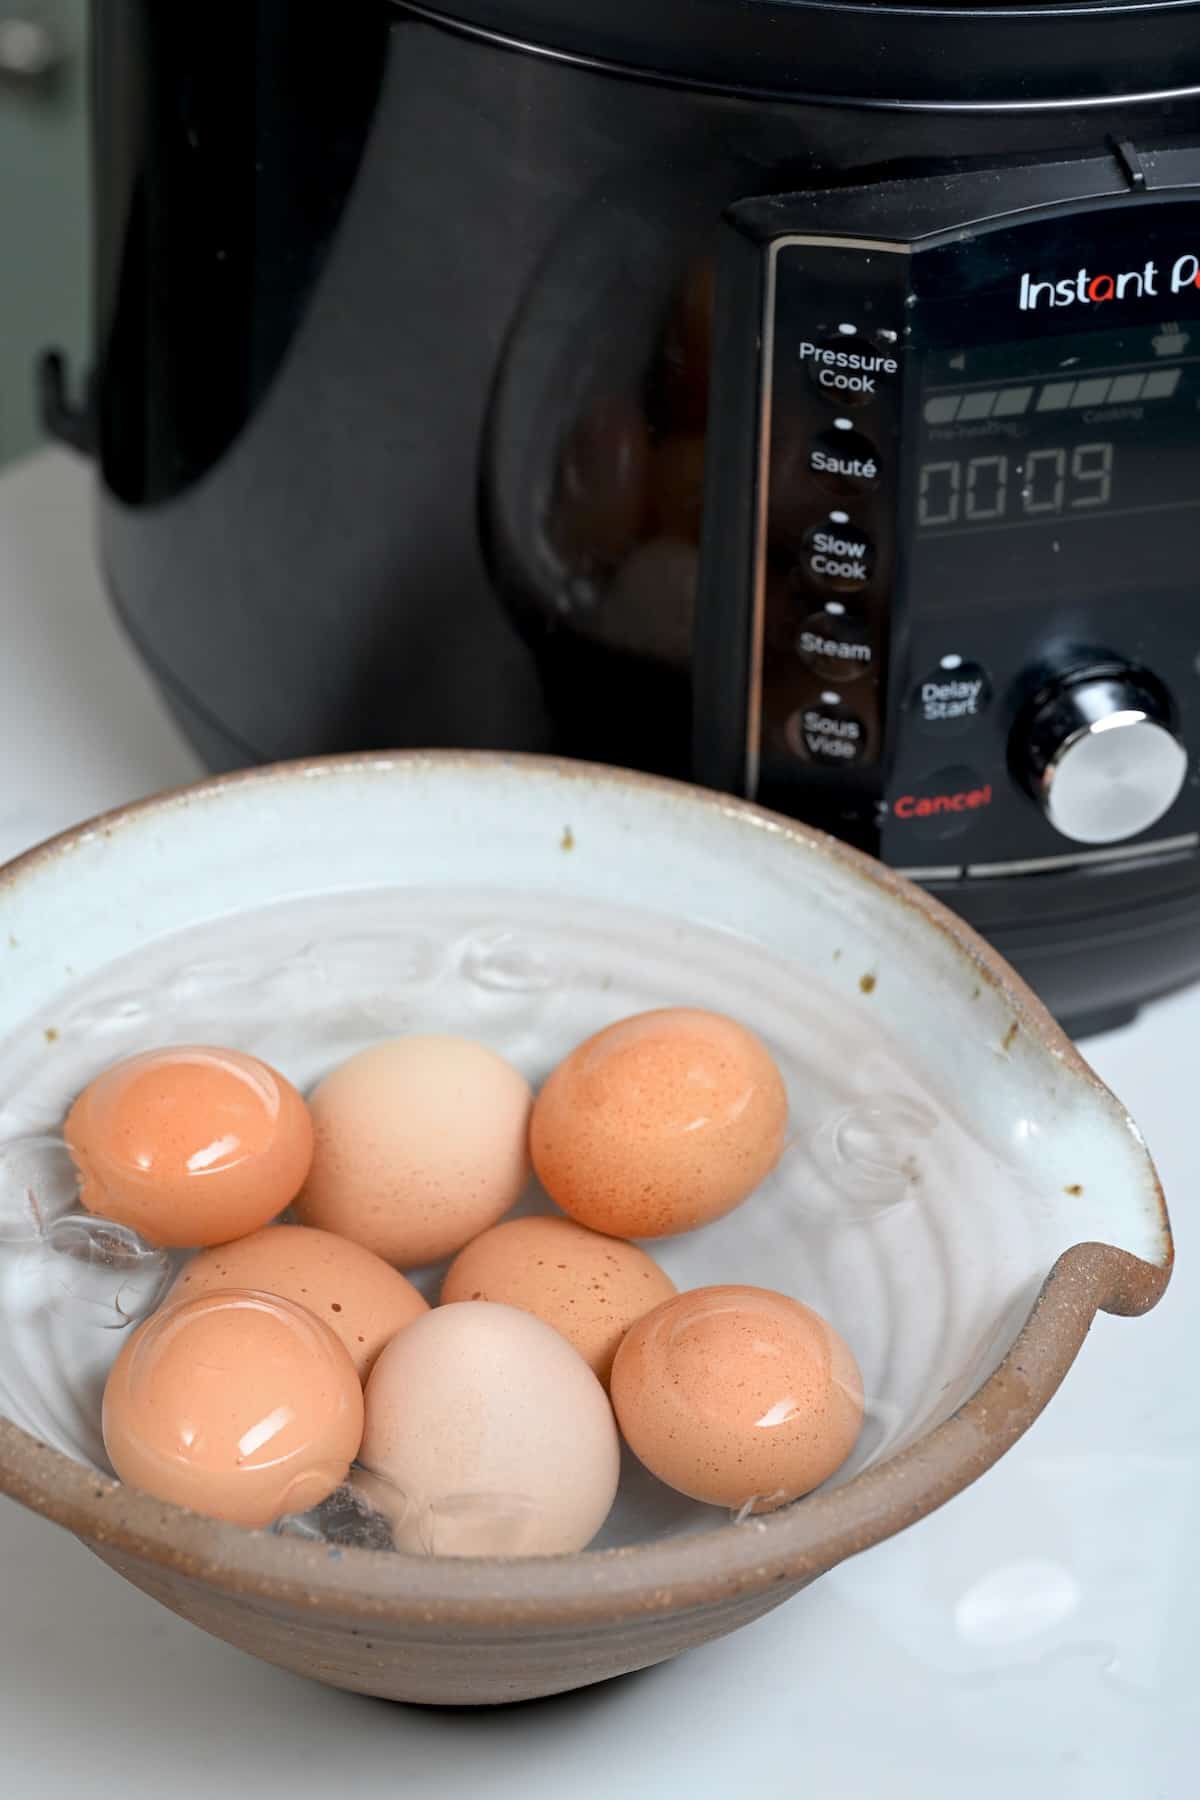 https://www.alphafoodie.com/wp-content/uploads/2023/03/Instant-Pot-Boiled-Eggs-Cooked-eggs-in-a-bowl-with-iced-water.jpeg